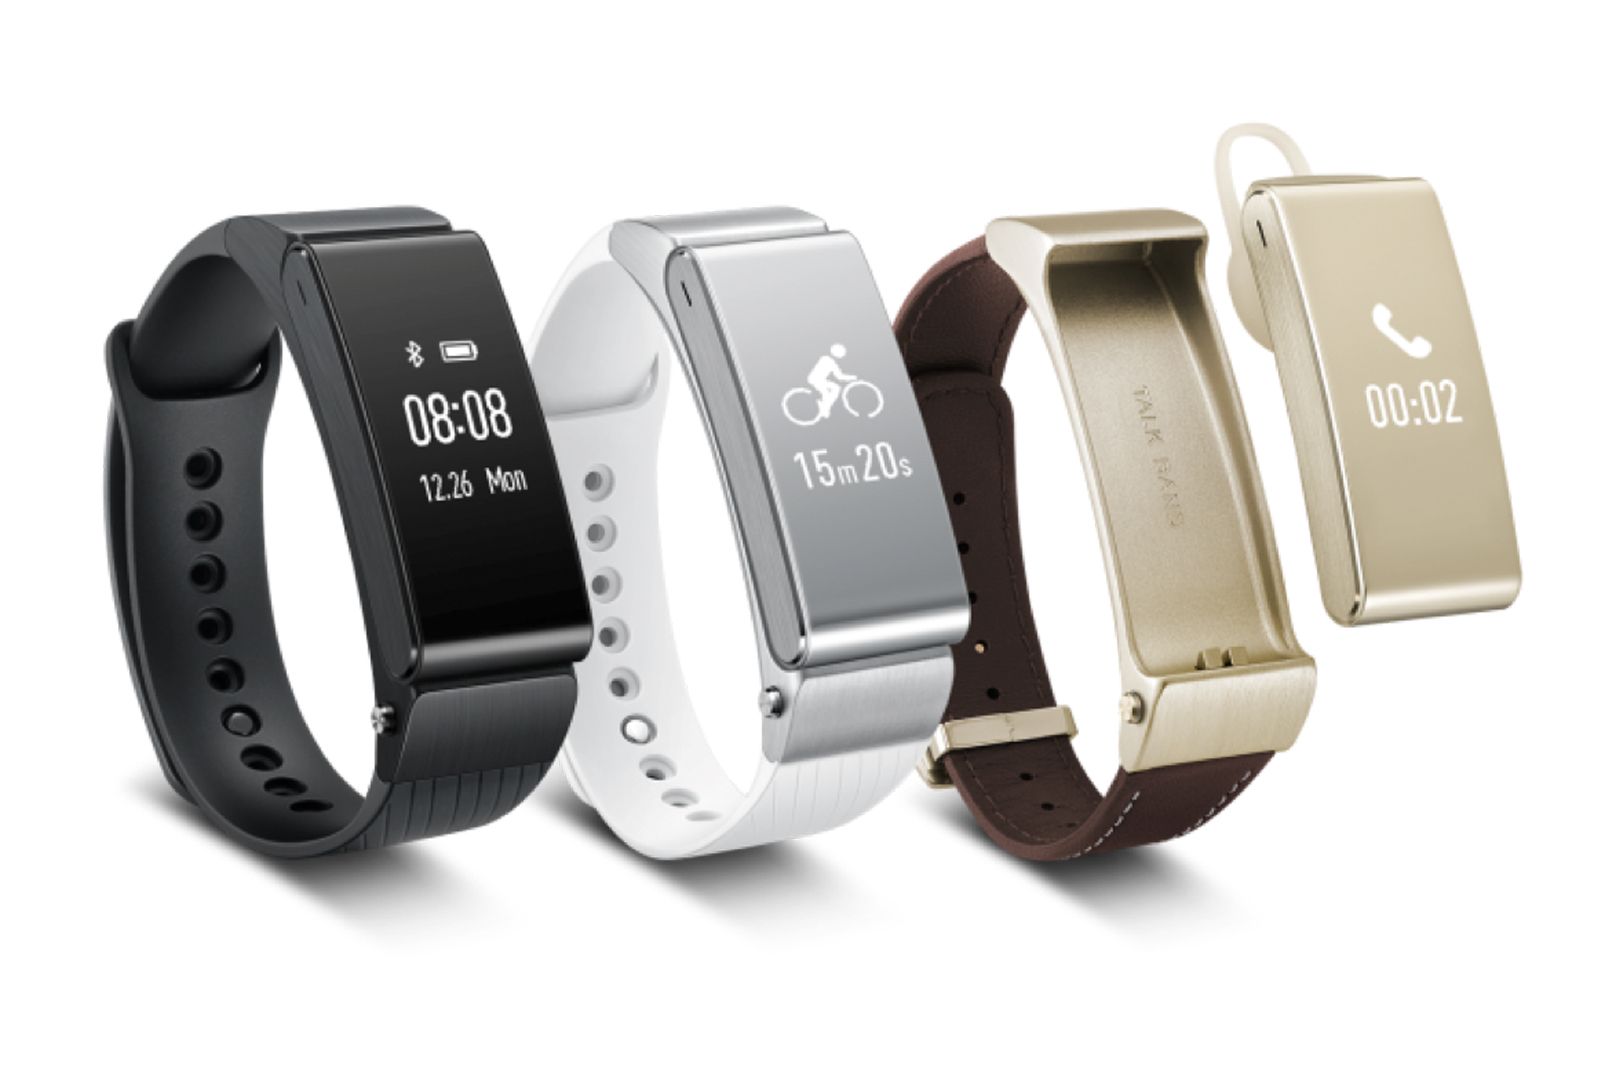 huawei focuses on wearables with launch of talkband b2 and talkband n1 image 1